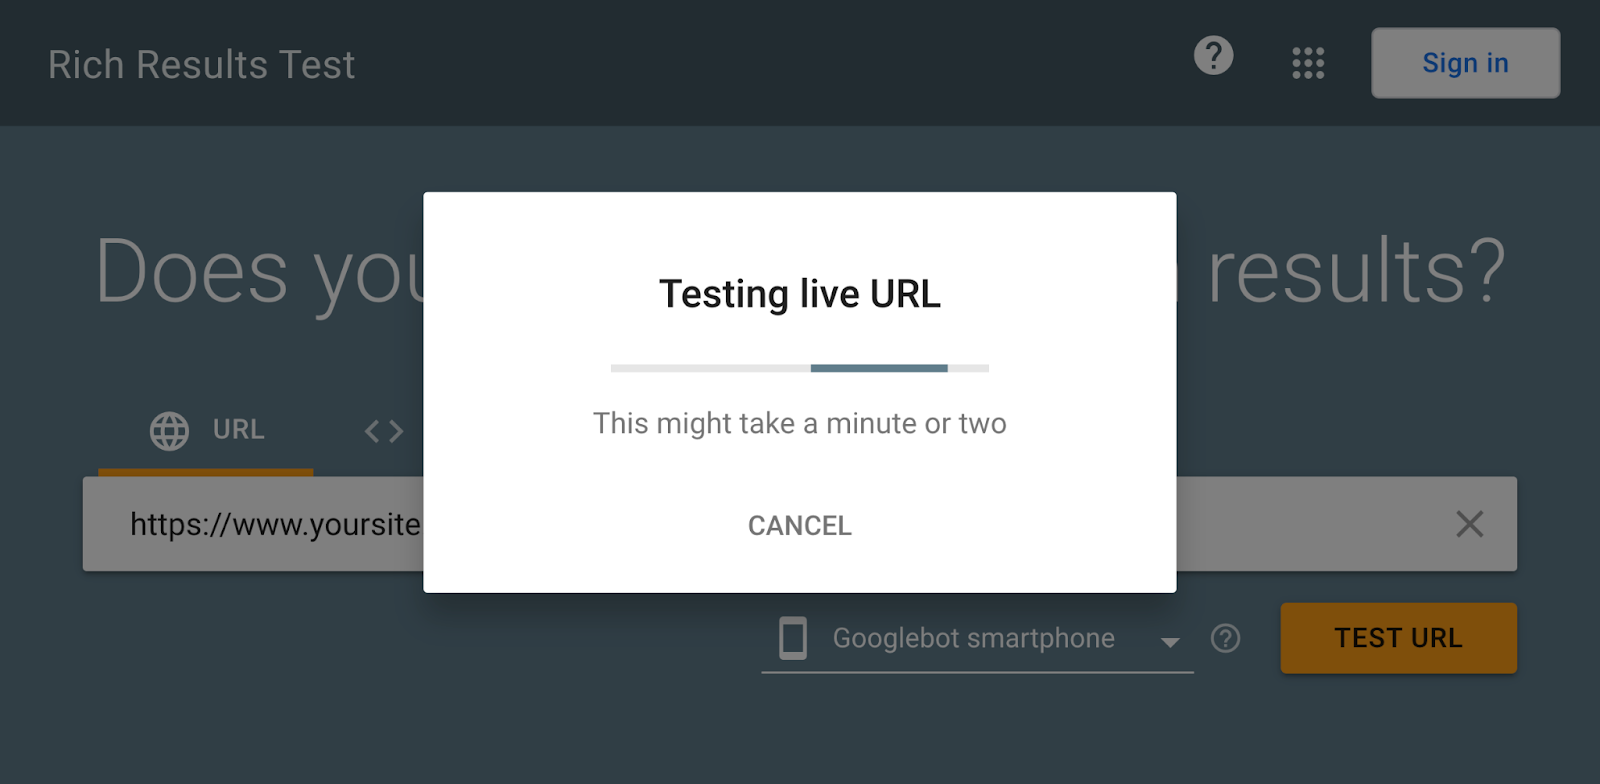 "Testing live URL" (in progress) page in Rich Results Test tool